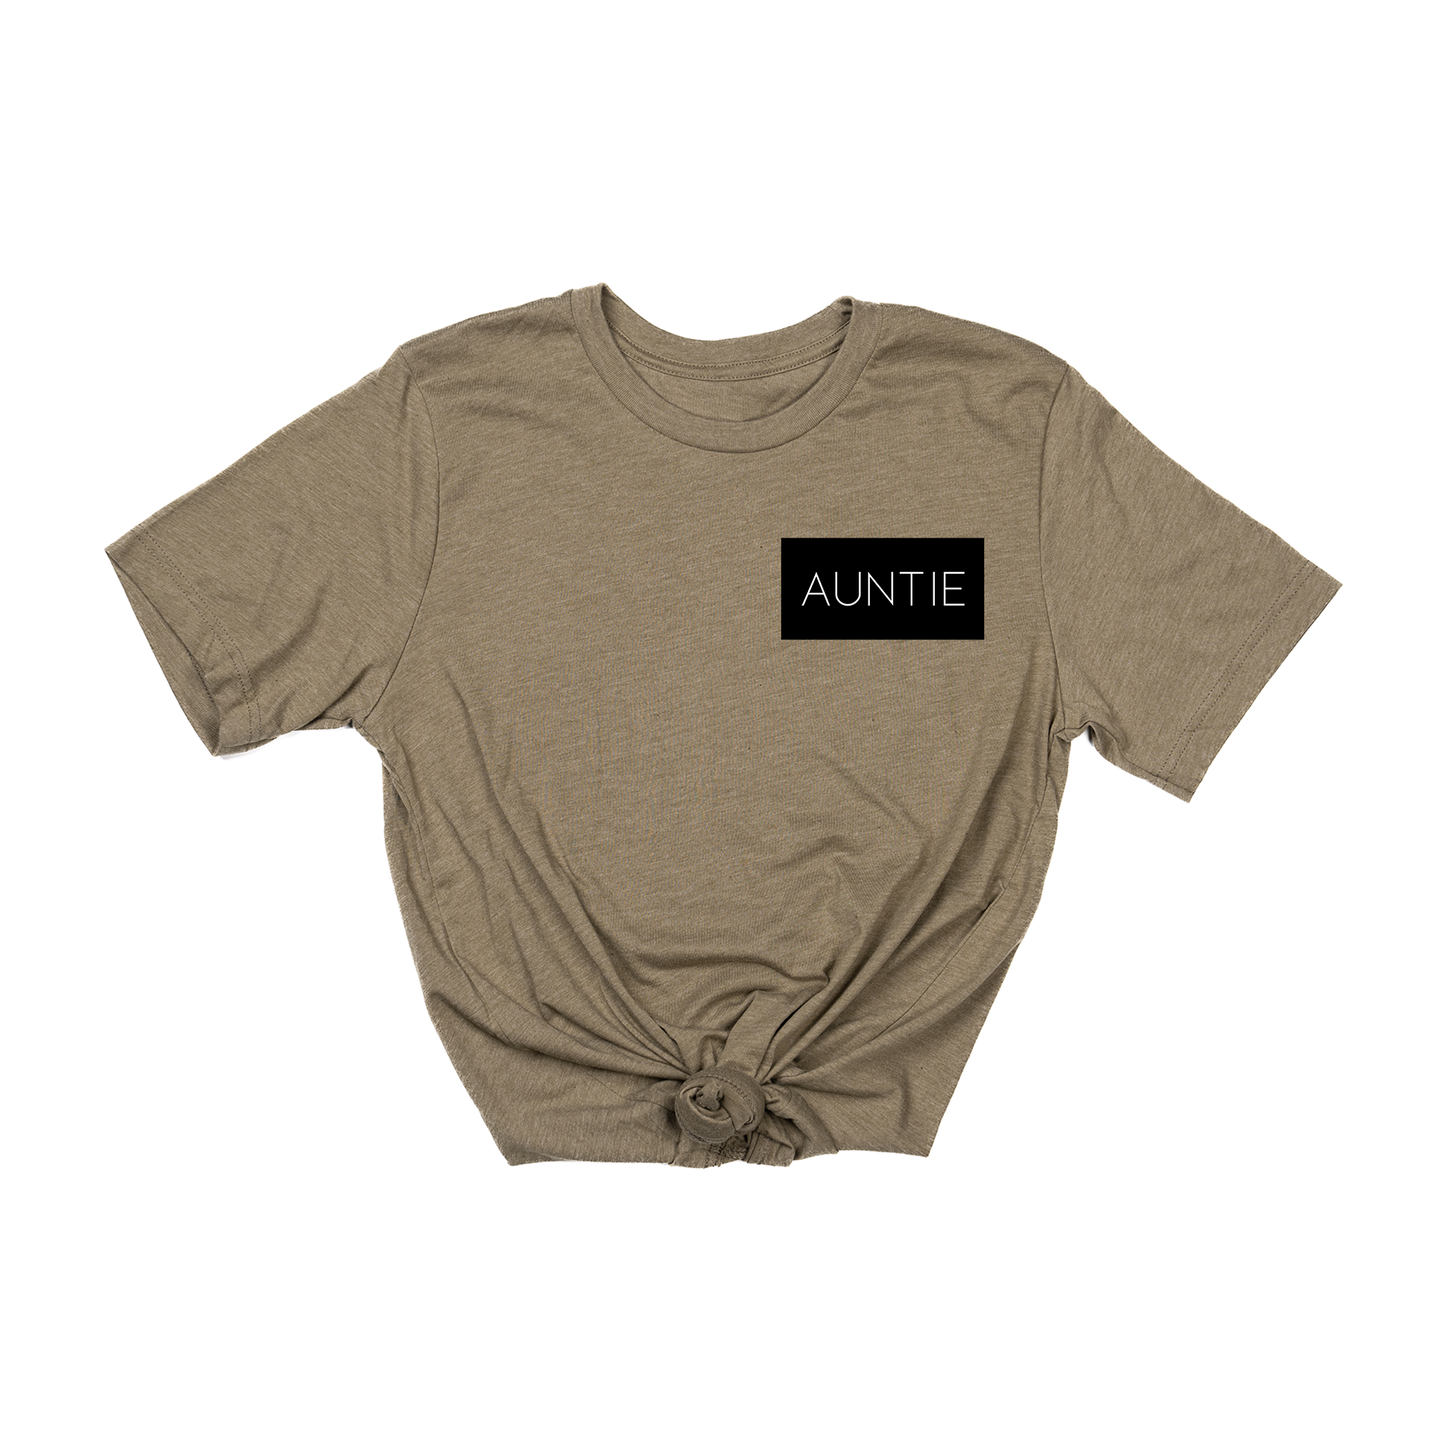 Auntie (Boxed Collection, Pocket, Black Box/White Text) - Tee (Olive)